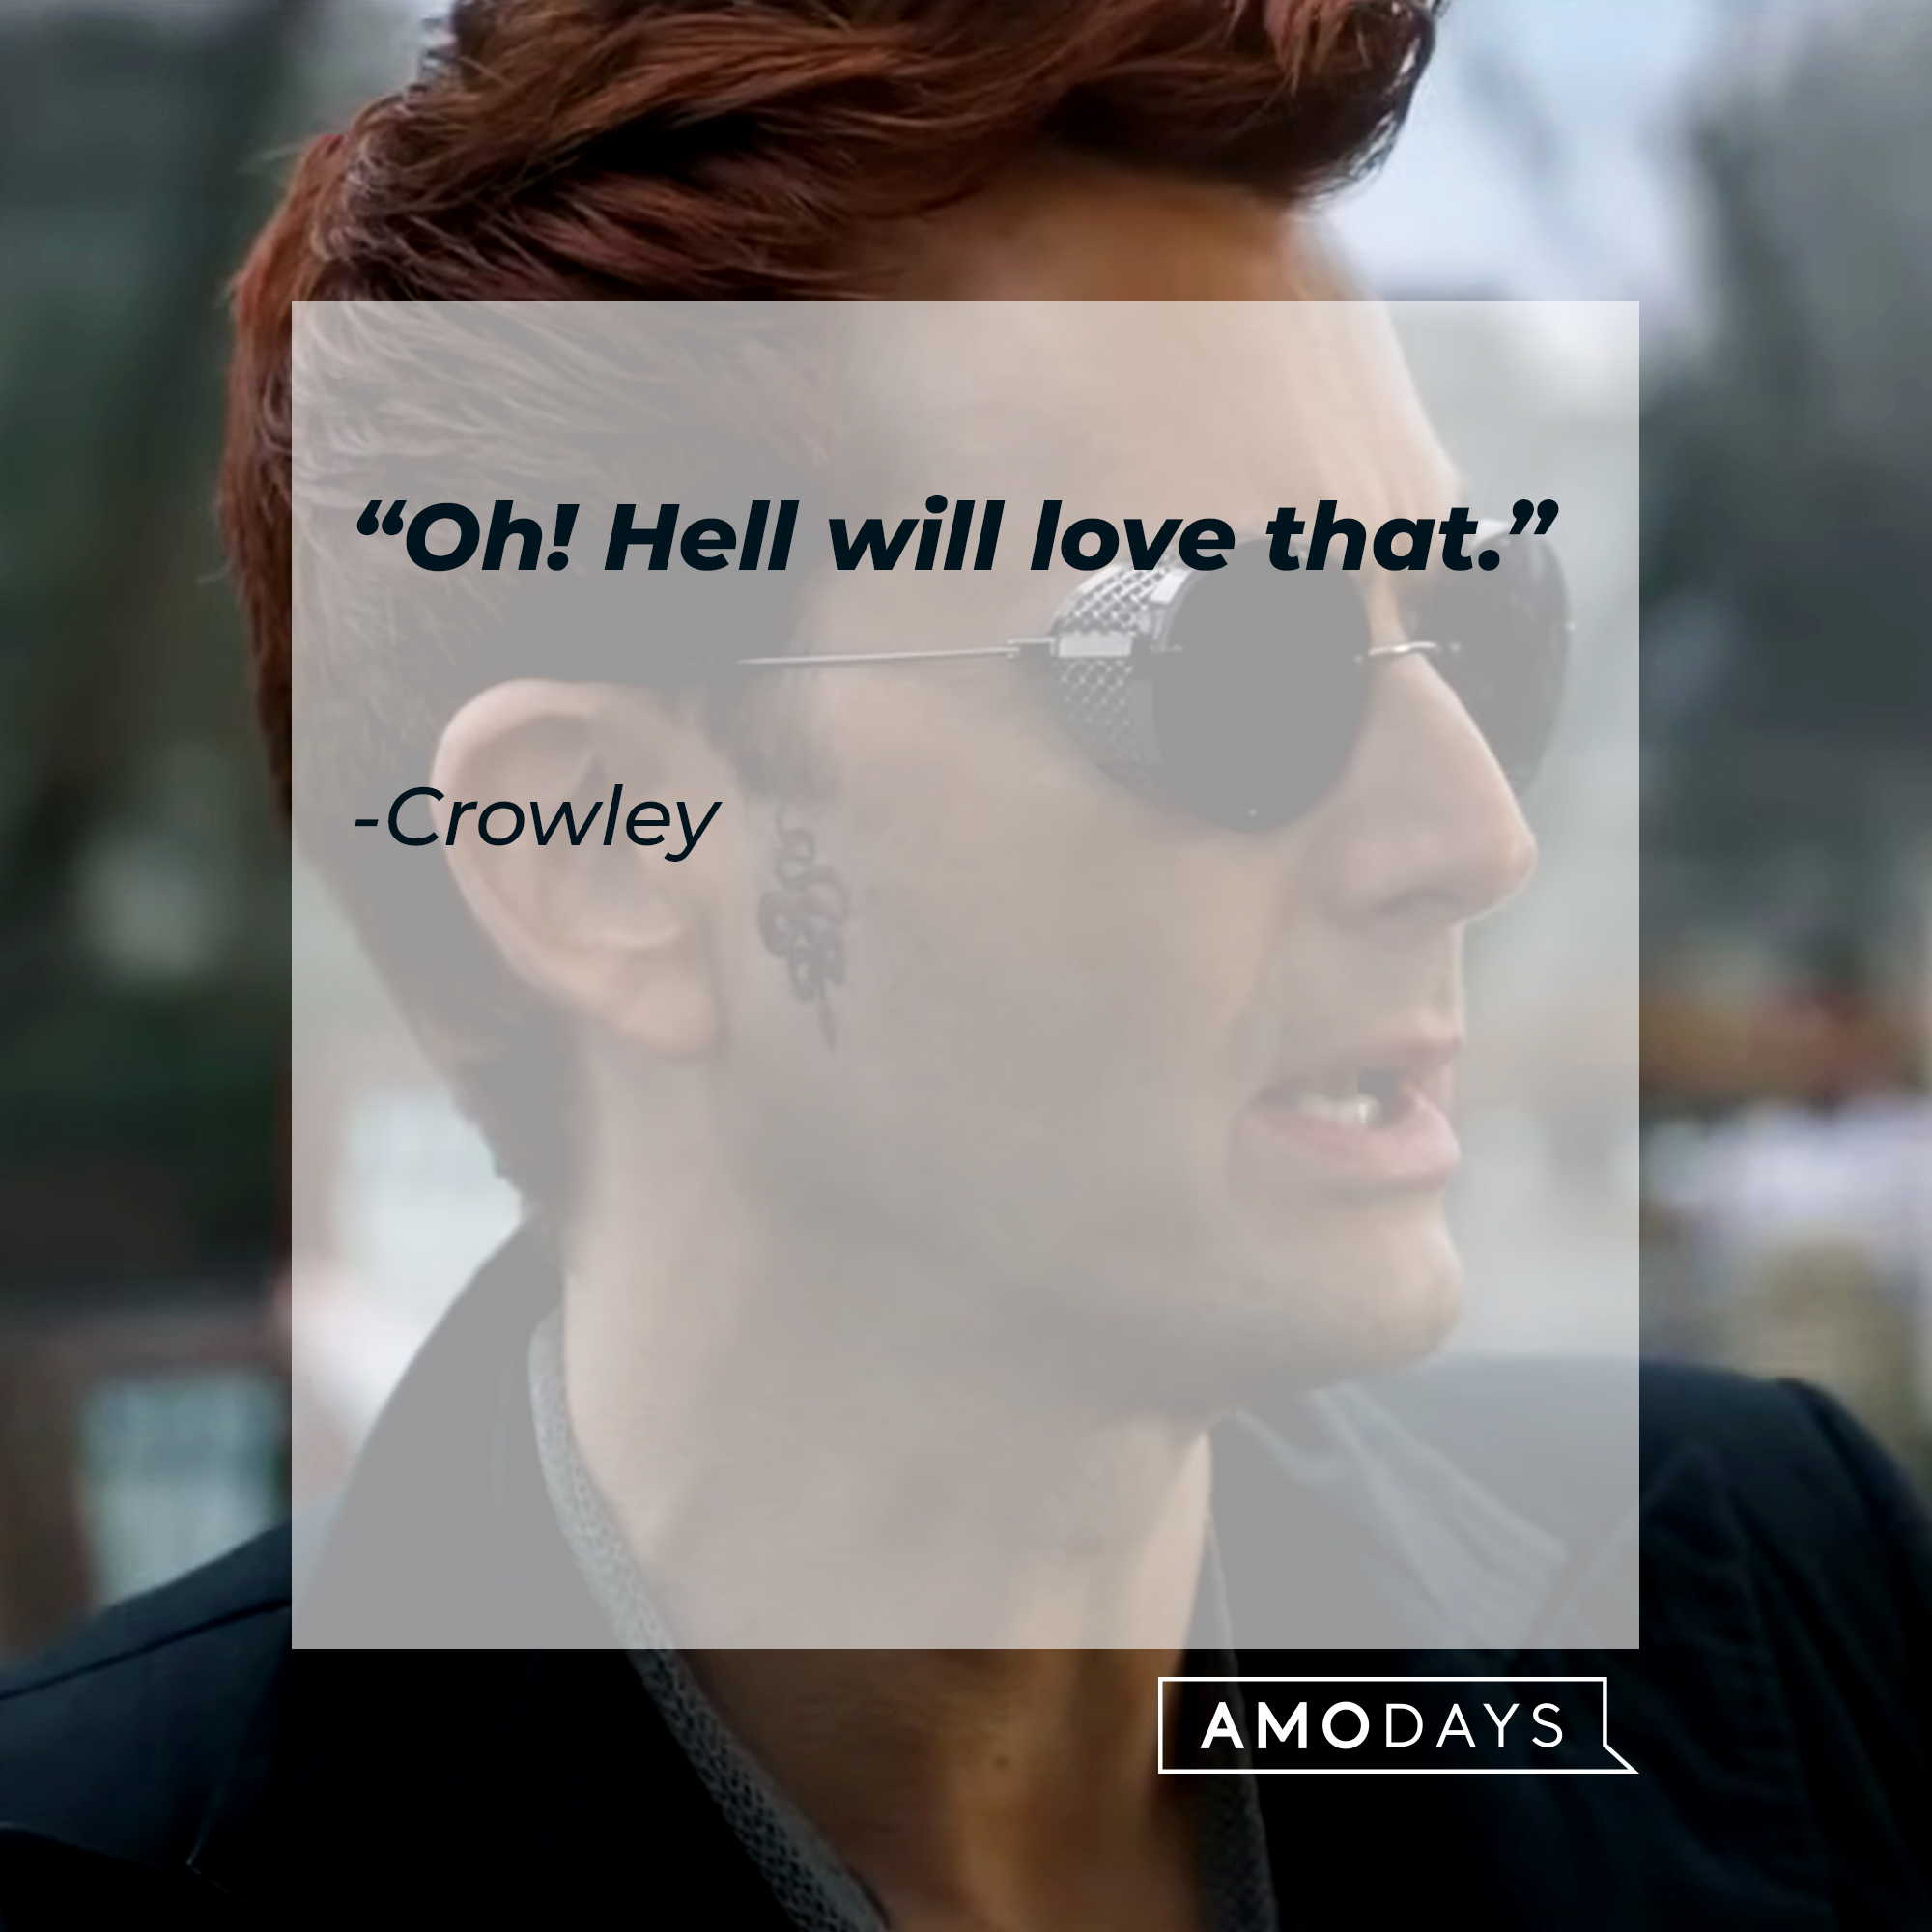 Crowley's quote: "Oh! Hell will love that." | Source: Facebook.com/goodomensprime